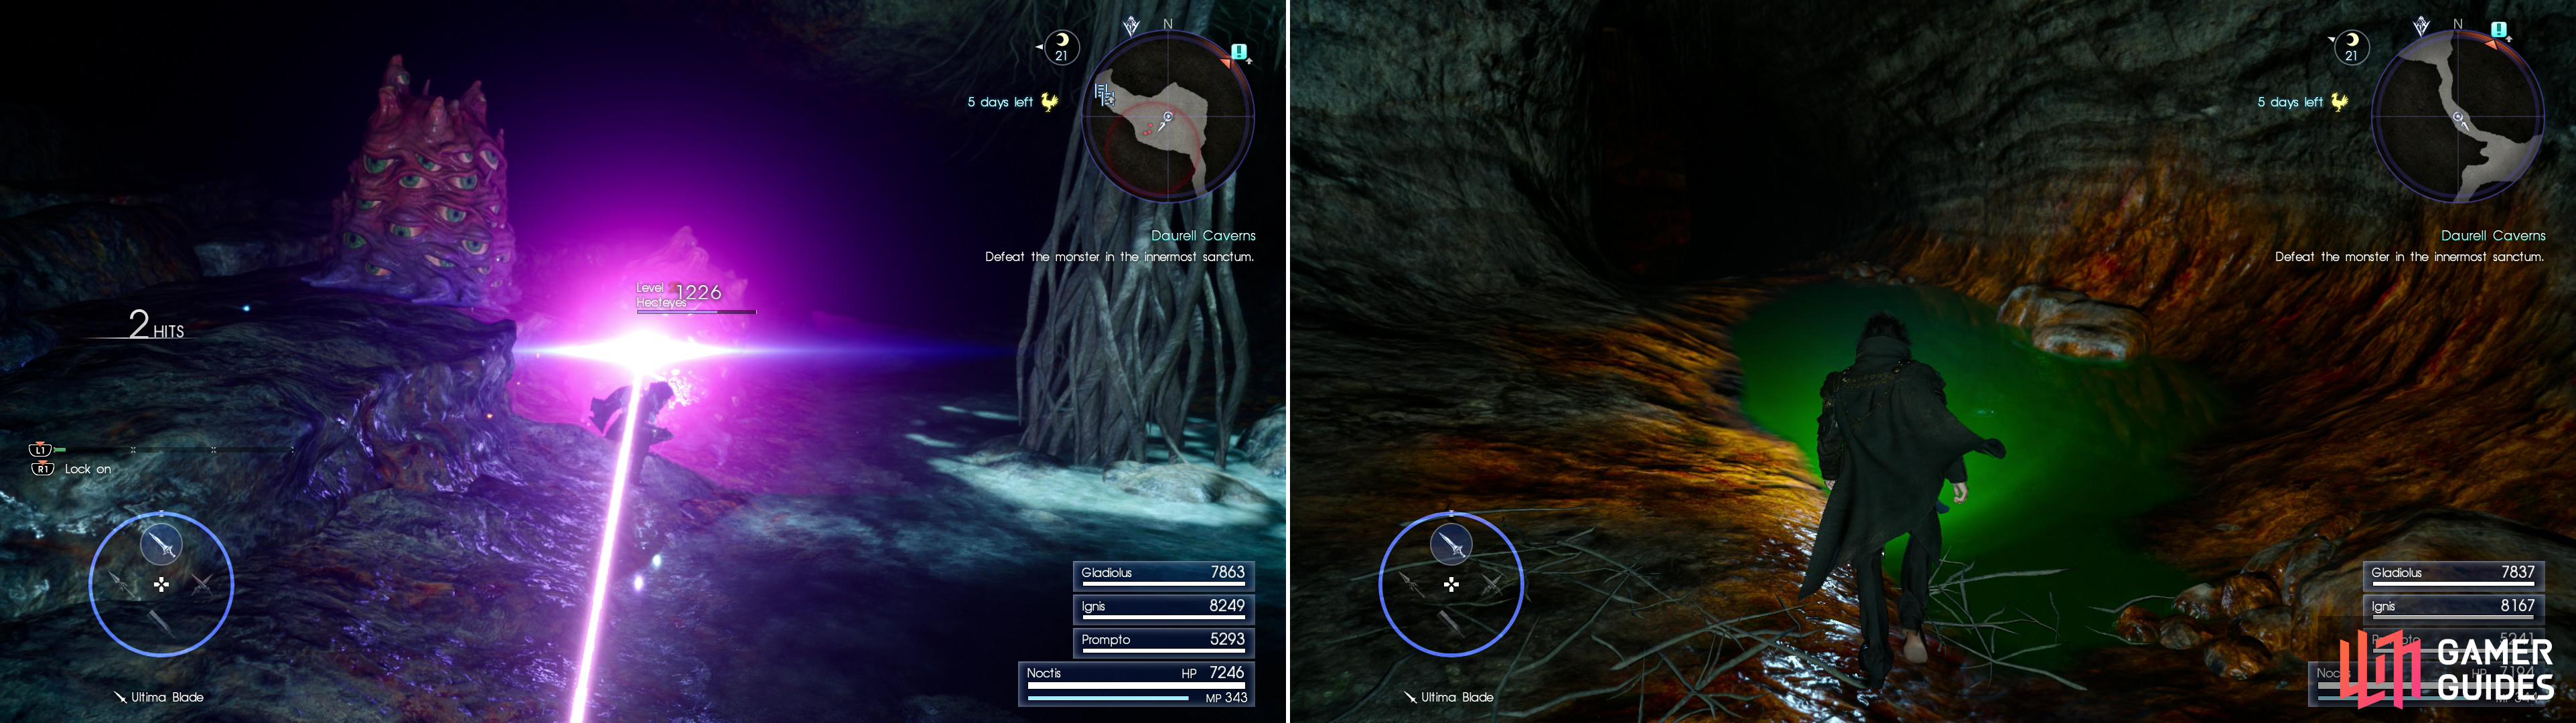 Hecteyes can shoot lasers and flash their eyes to cause confusion (left). Pools of toxic water also make traversing the Daurell Caverns more dangerous (right).